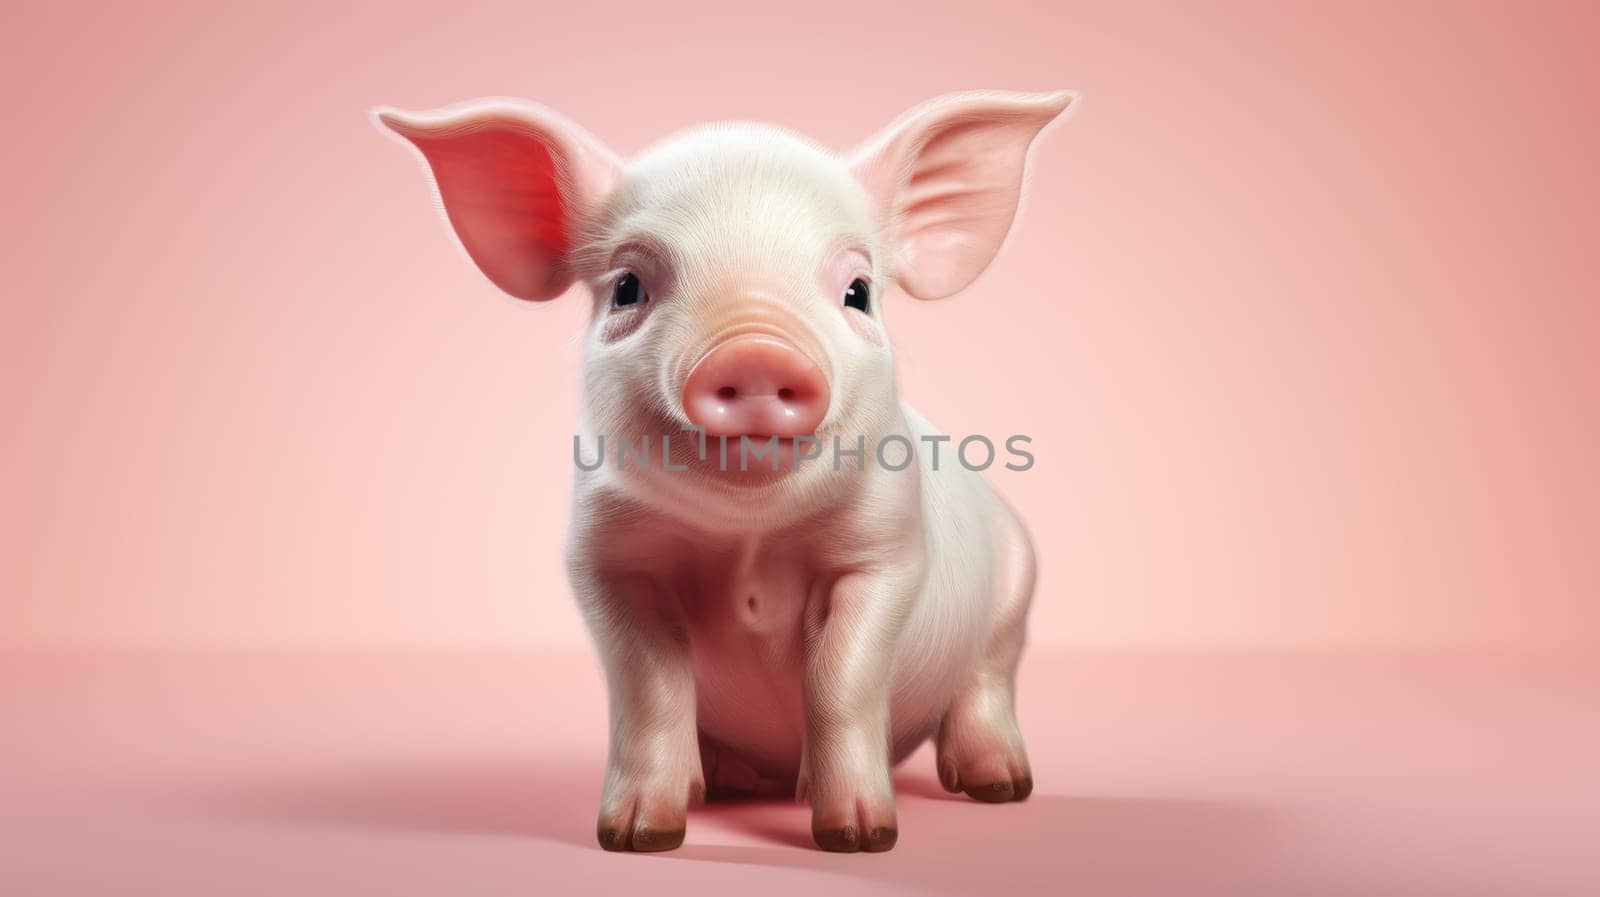 This cute baby piglet is perfect for marketing and branding. Its innocence and charm will captivate your audience, evoking warmth and joy. Add whimsy to your project with this delightful image.